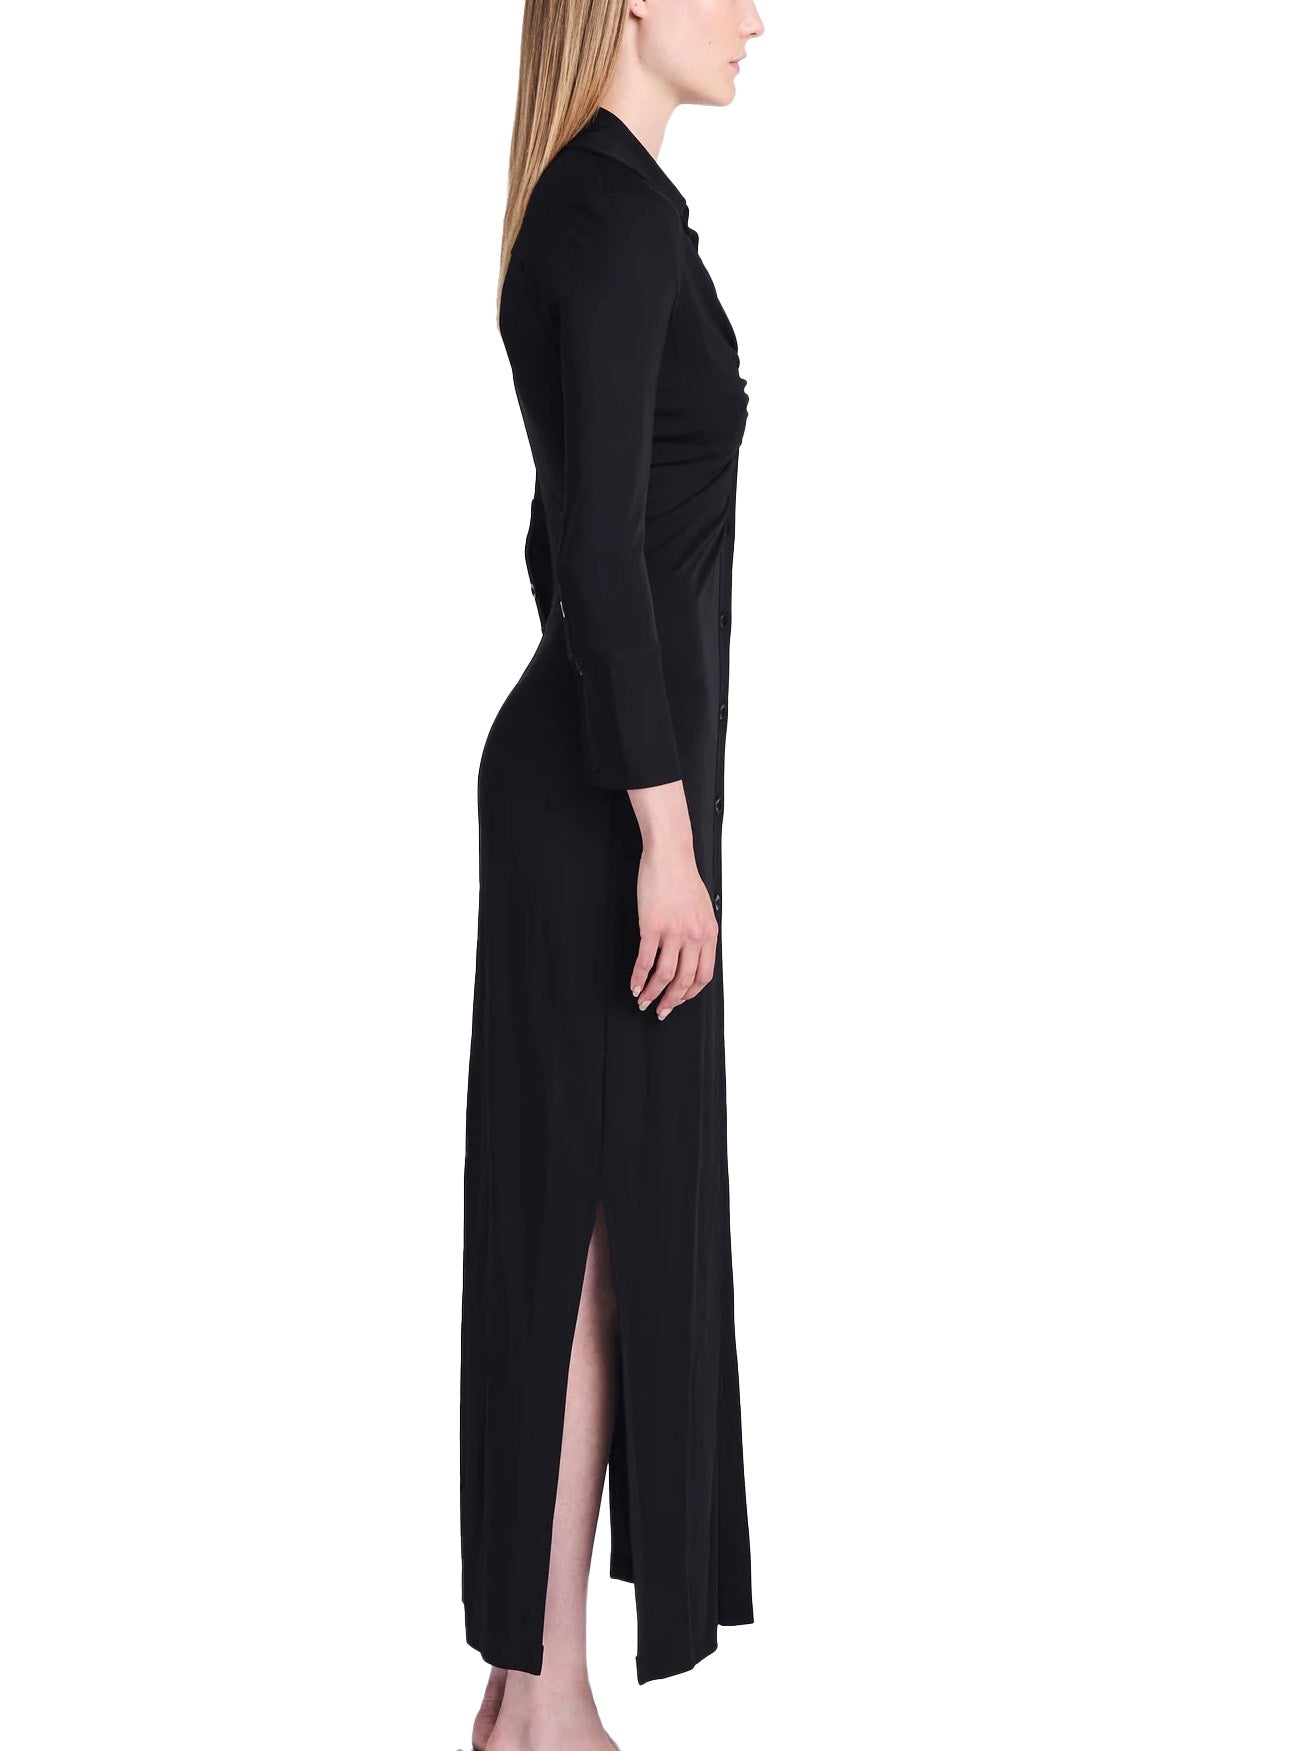 Clara Ruched Dress in Matte Crepe Jersey